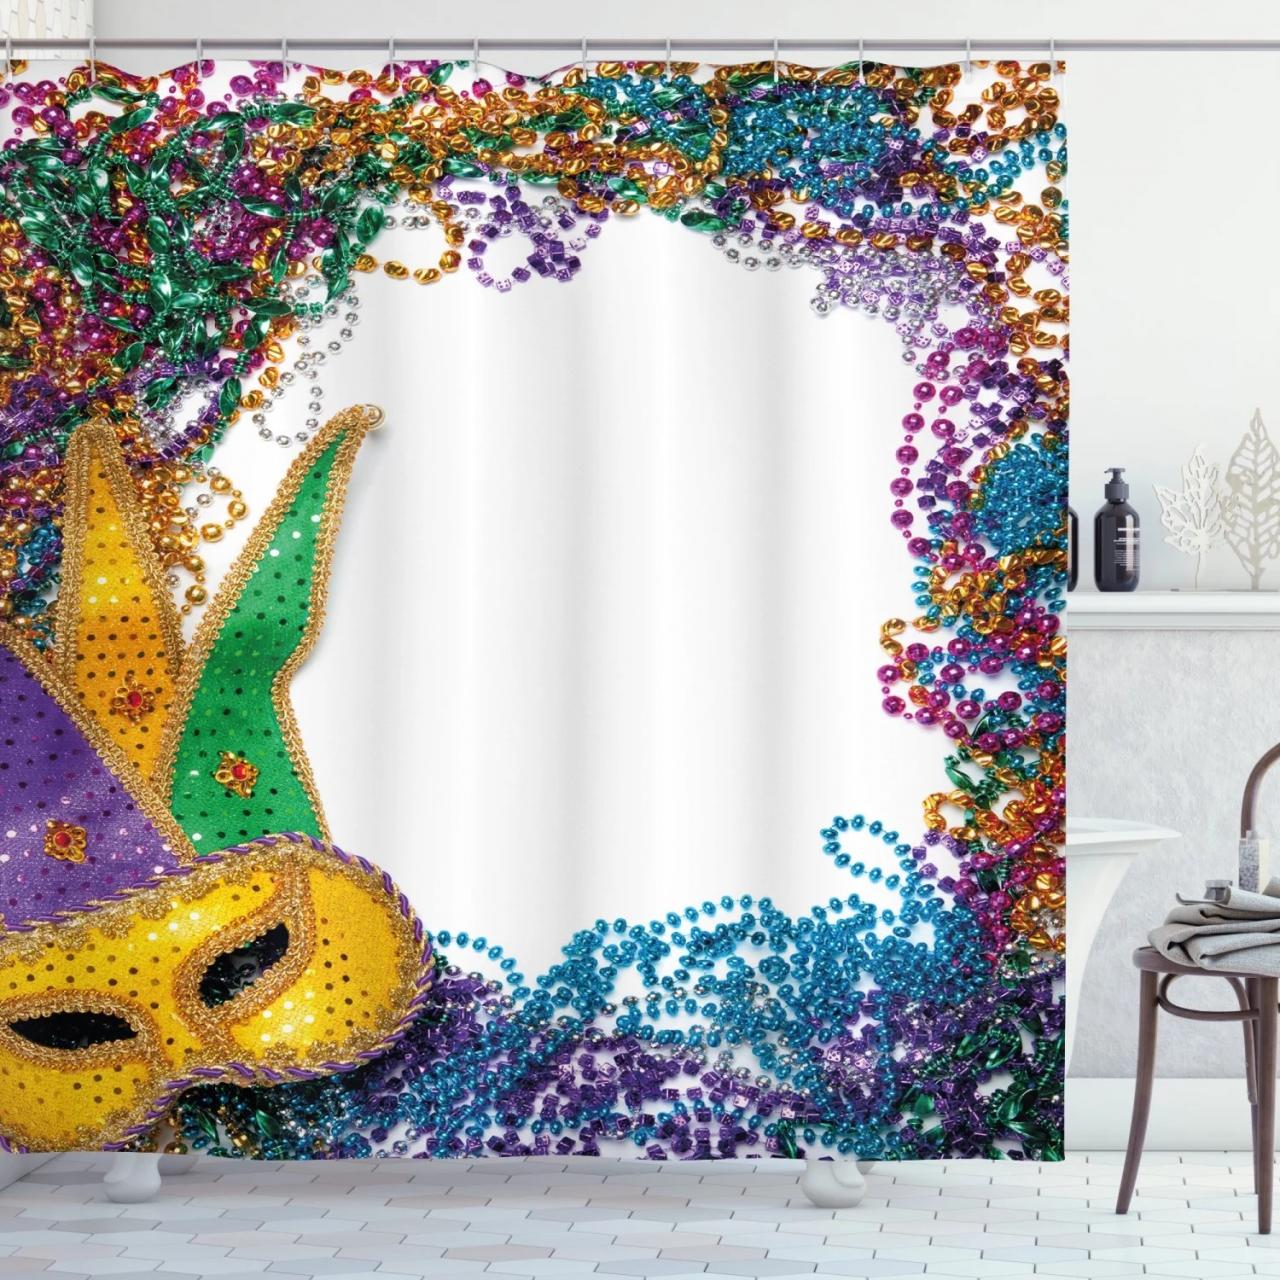 Mardi Gras Shower Curtain, Colorful Framework Design with Vibrant Beads